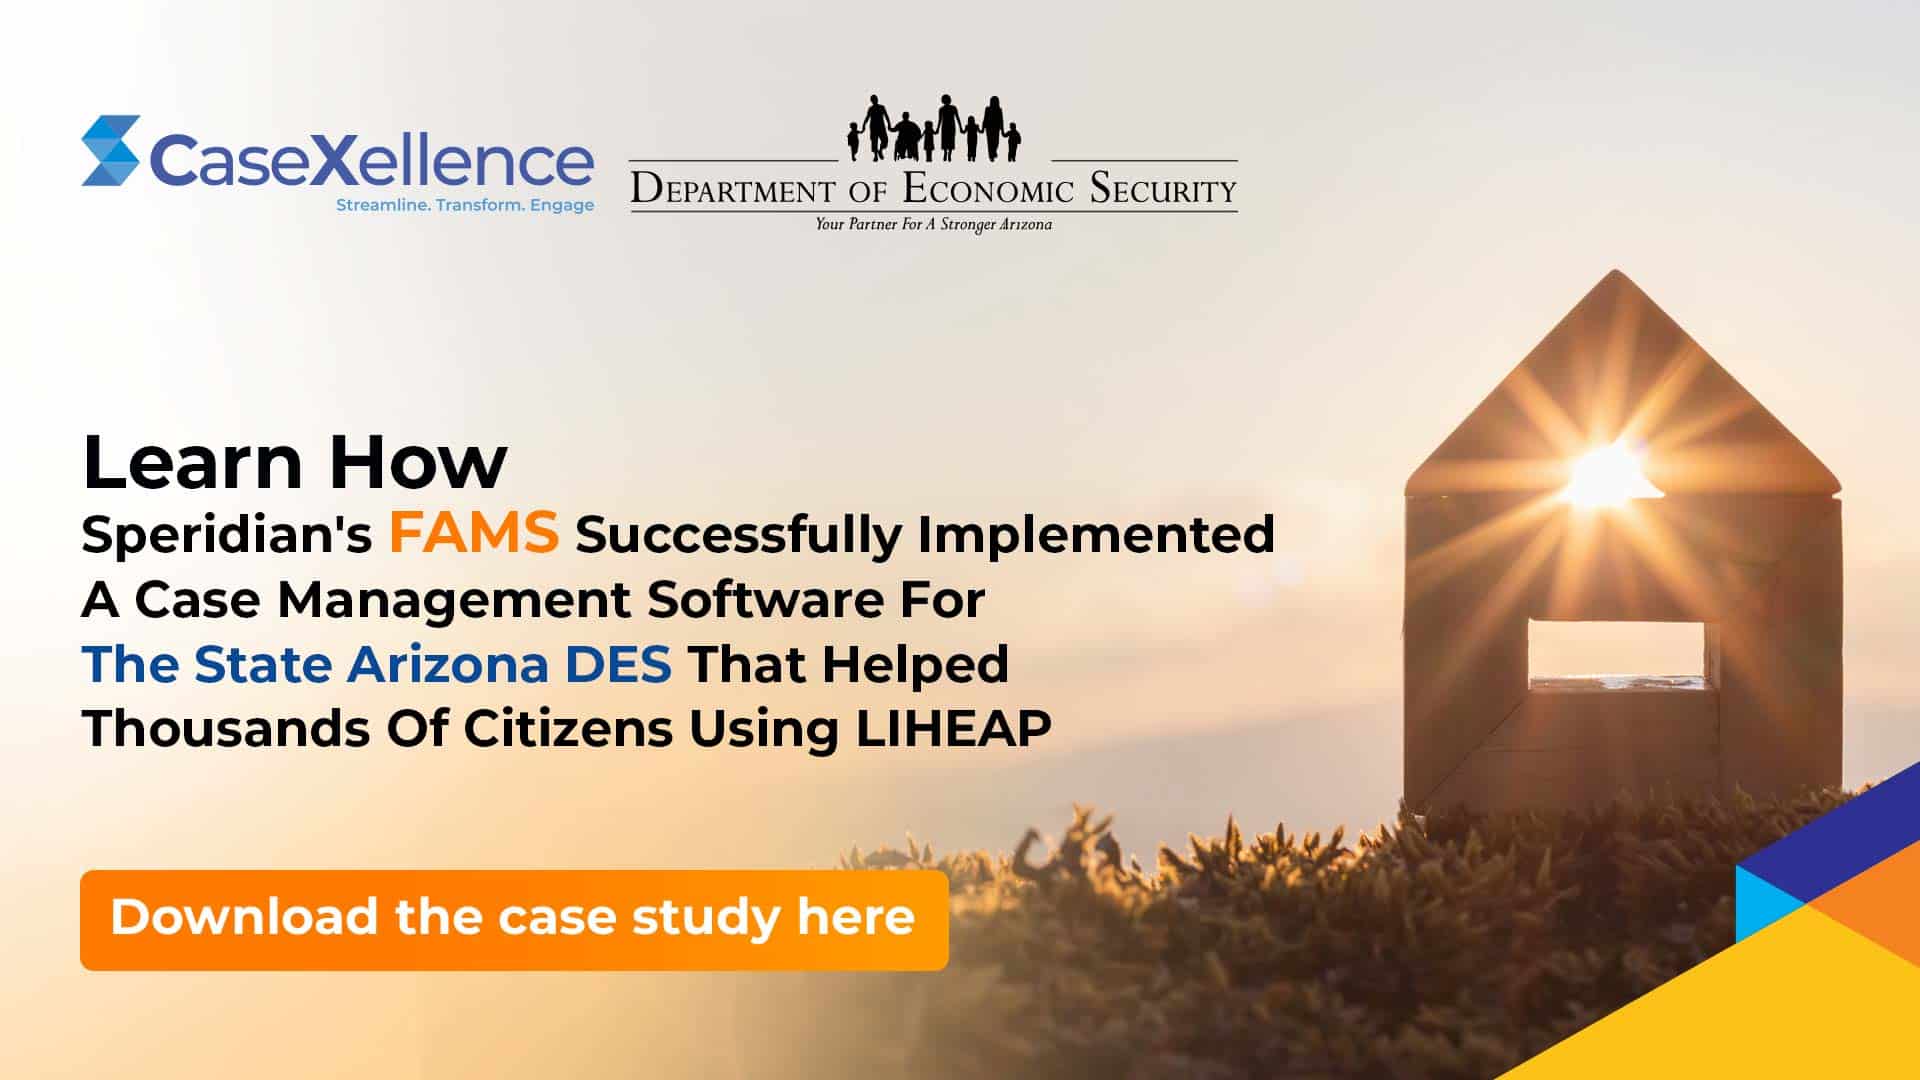 Speridian’s FAMS Successfully Implemented A Case Management Software For The State Arizona DES That Helped Thousands Of Citizens Using LIHEAP